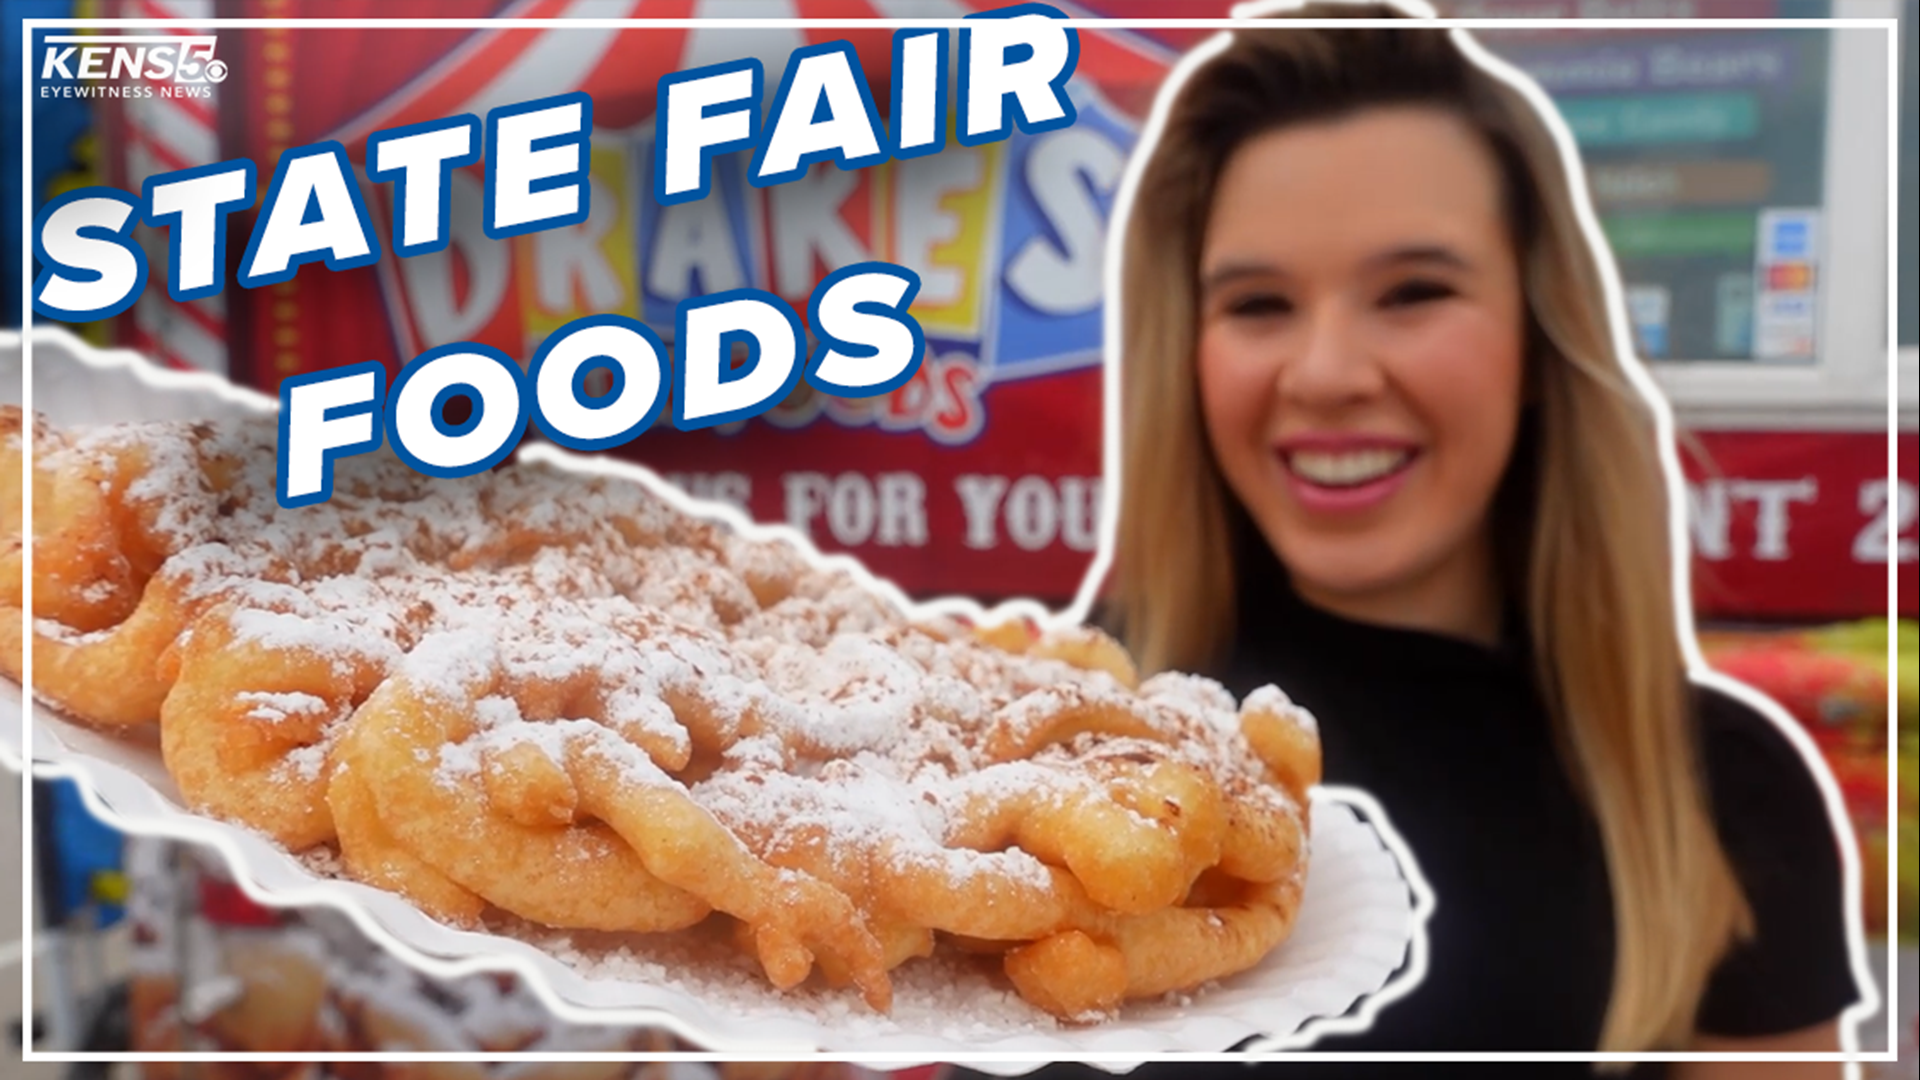 Have a sweet tooth? Well, Drake's Fun Foods shows KENS 5's Lexi Hazlett what to expect when you visit them!